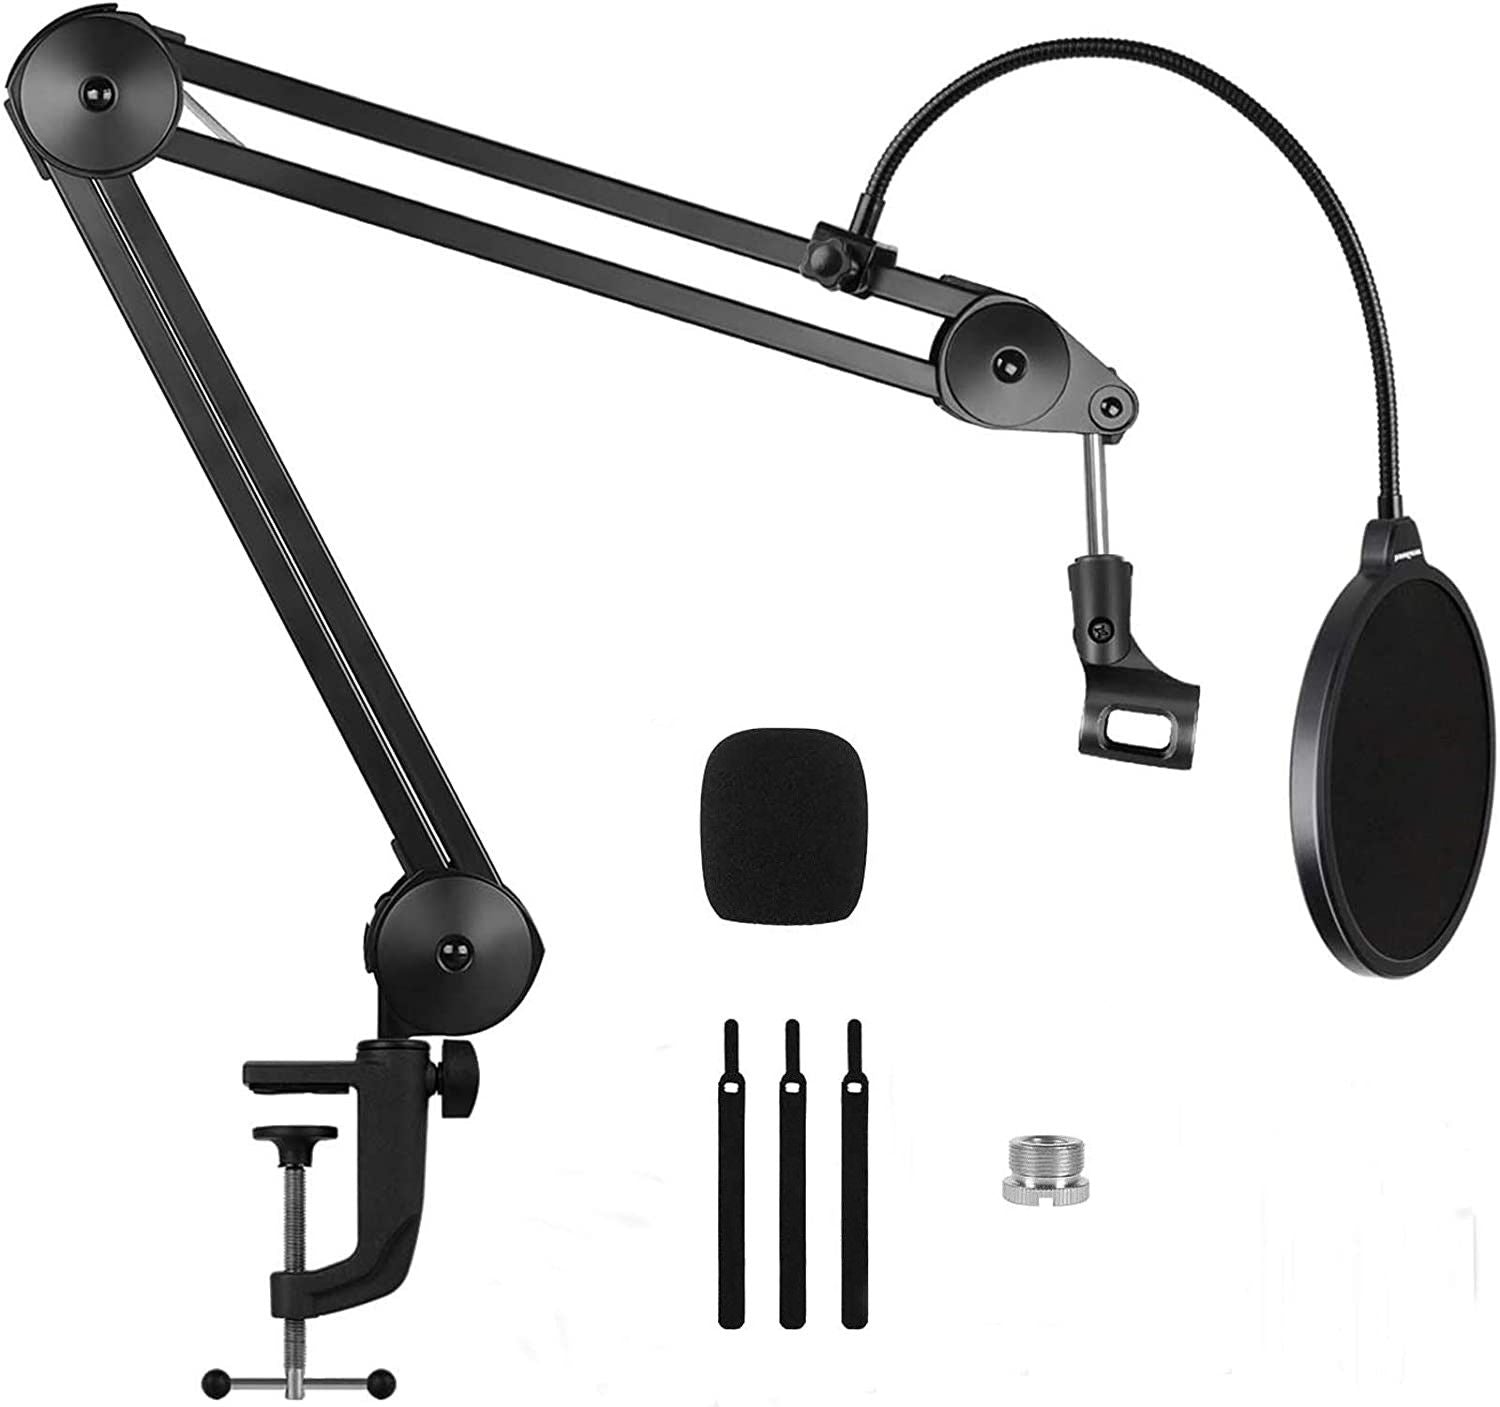 Heavy Duty Microphone Arm Microphone Stand Suspension Scissor Boom Stands with 6" Pop Filter and Cable Ties for Recording - SILBERSHELL